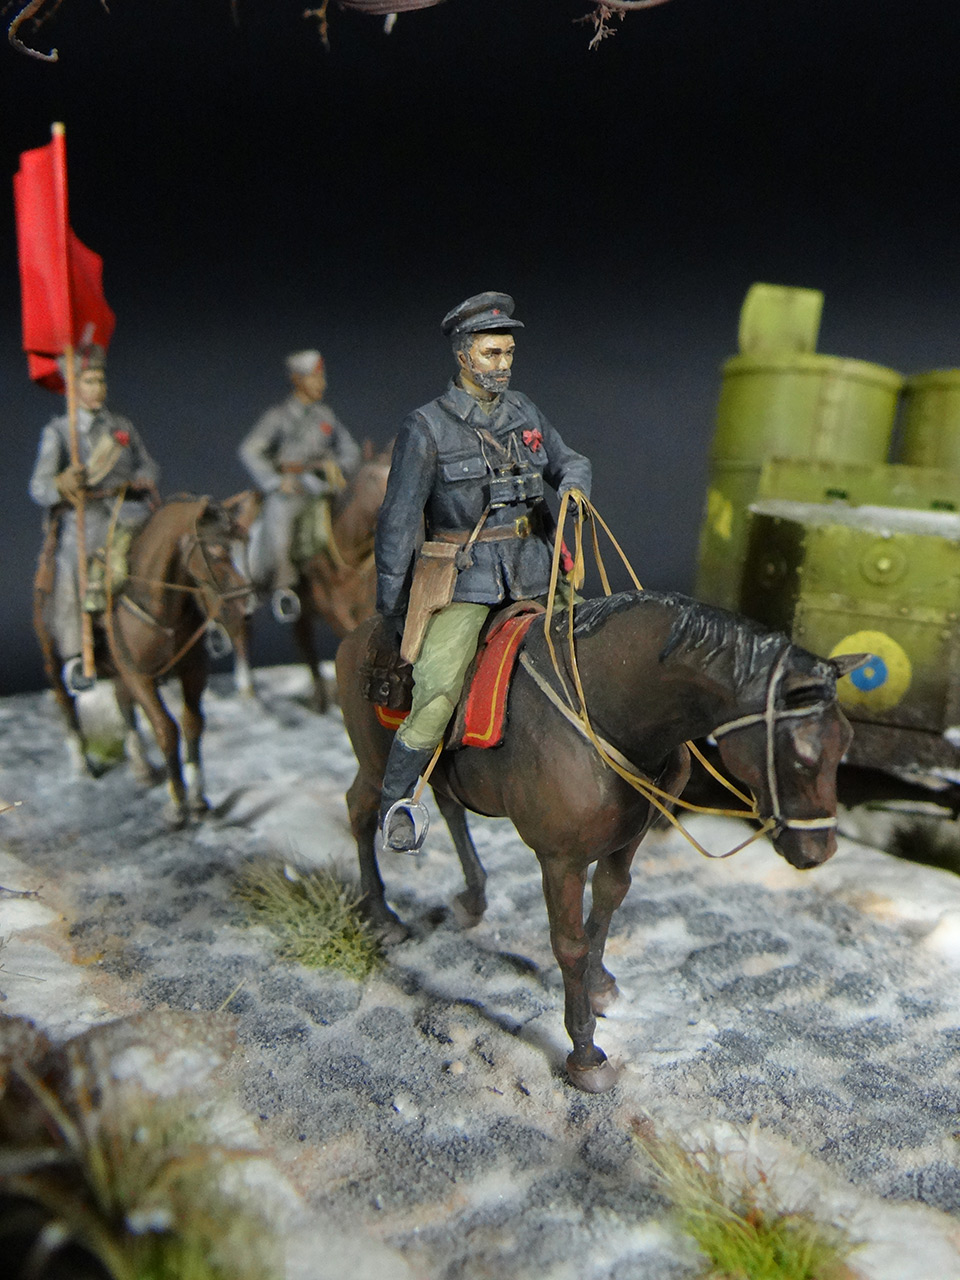 Dioramas and Vignettes: All Power to the Soviets!, photo #6